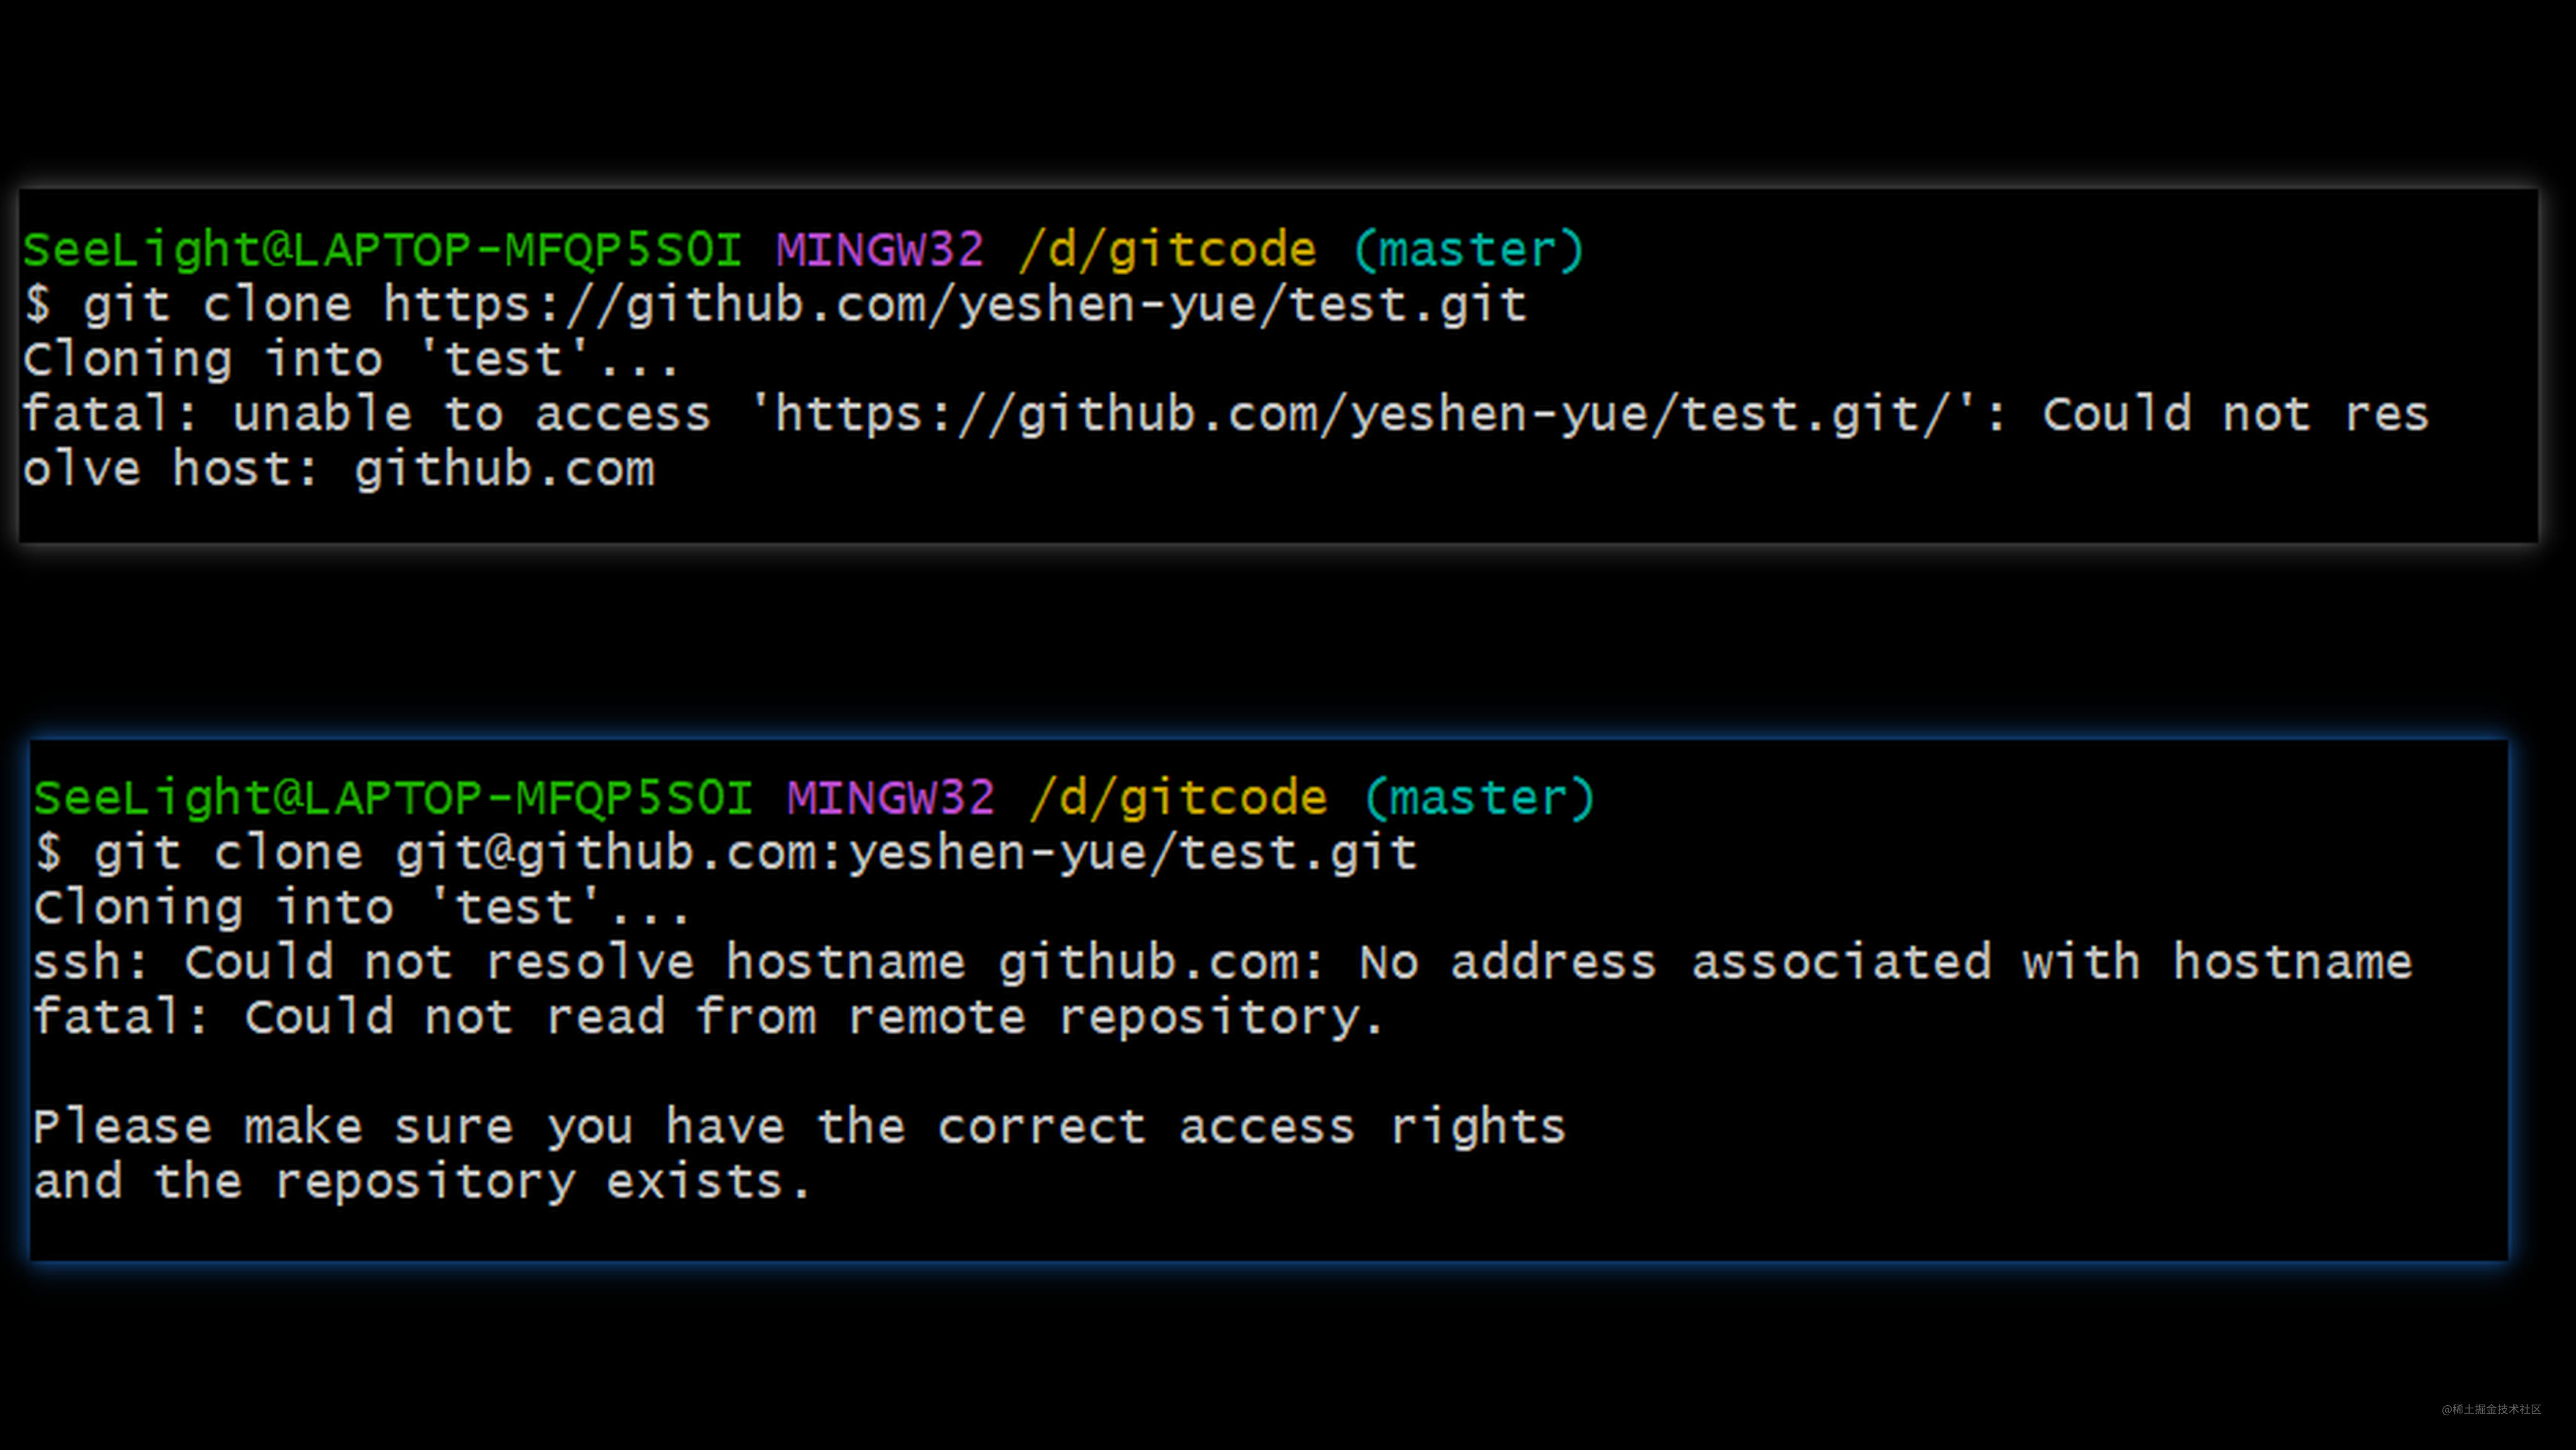 Git fatal unable to access. Could not resolve HOSTNAME. Could not resolve host.